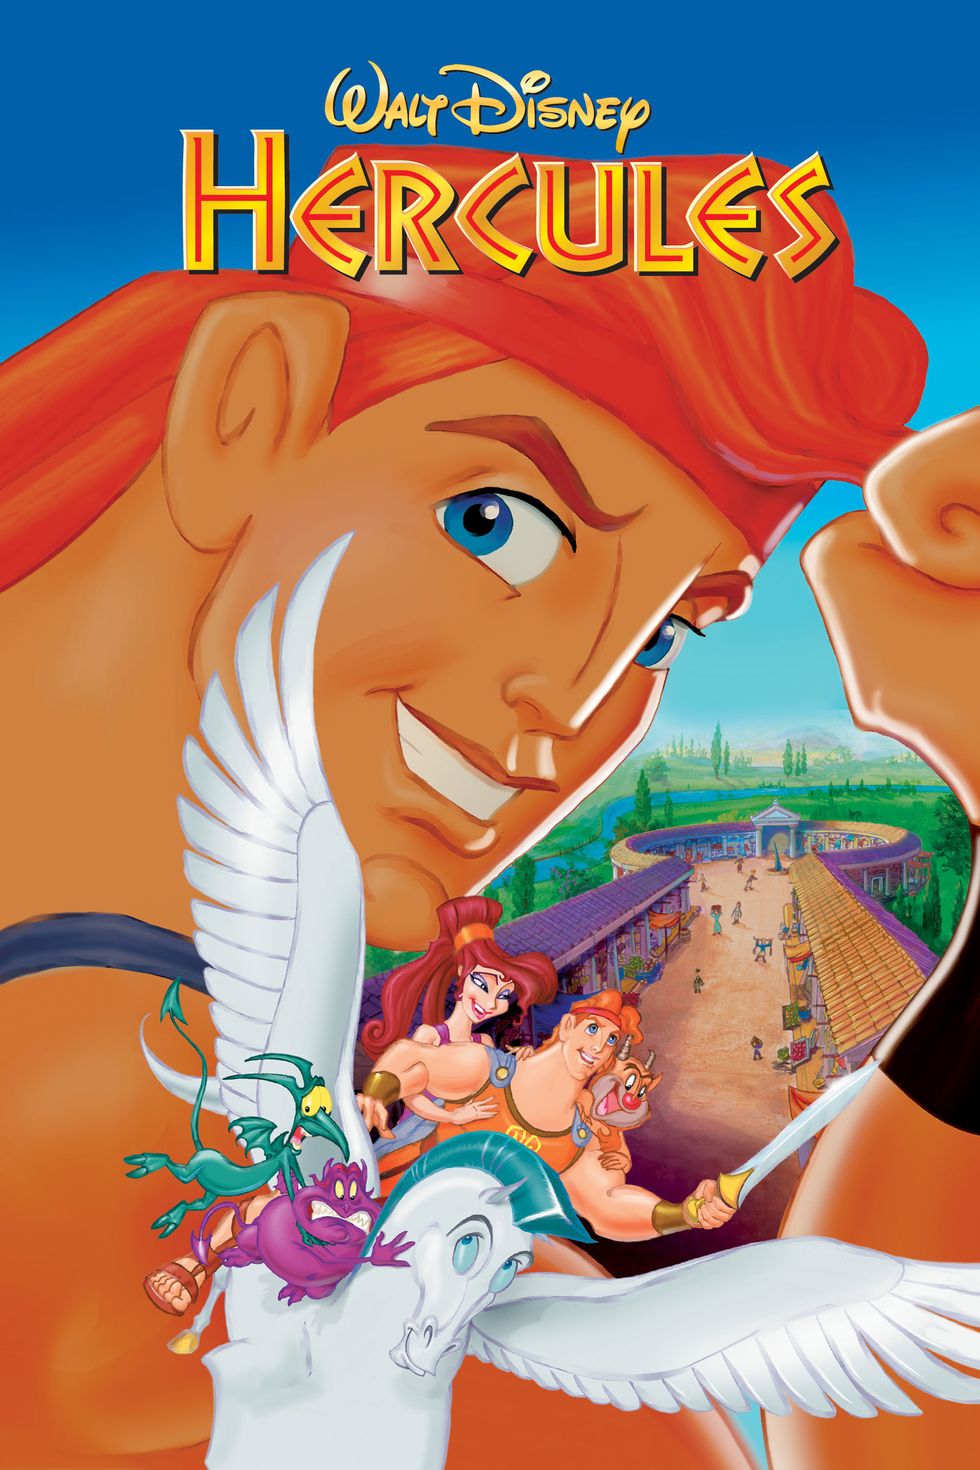 Disney's Hercules Is 20 Years Old And I'm Still In Disbelief